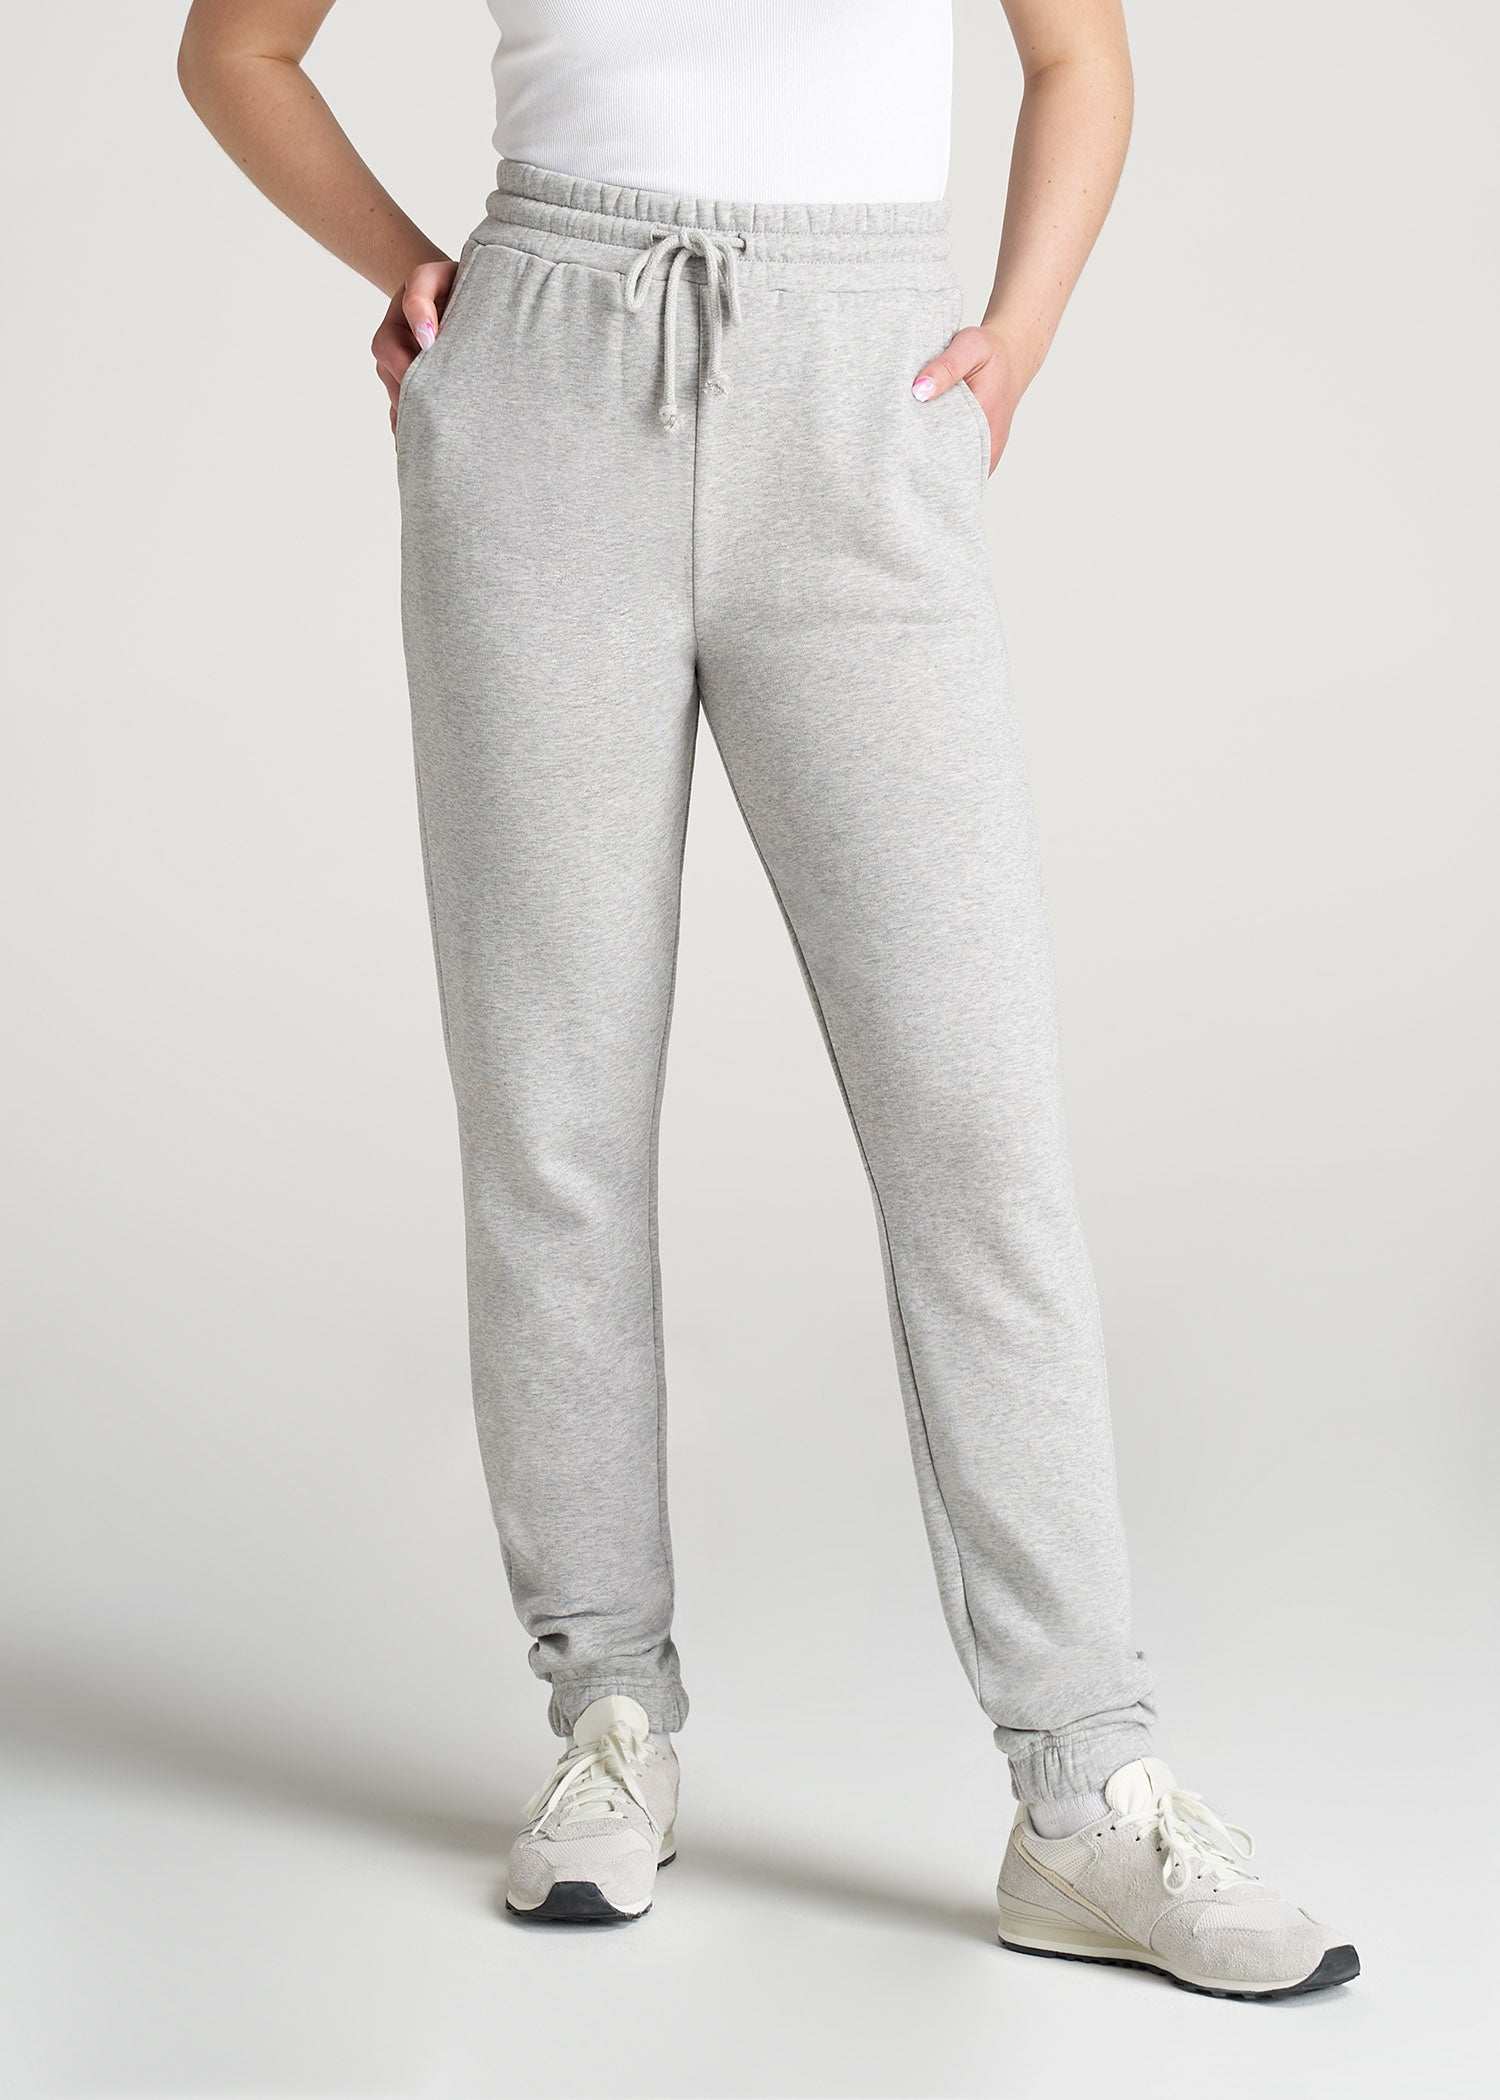 Sweatpants for Tall Women